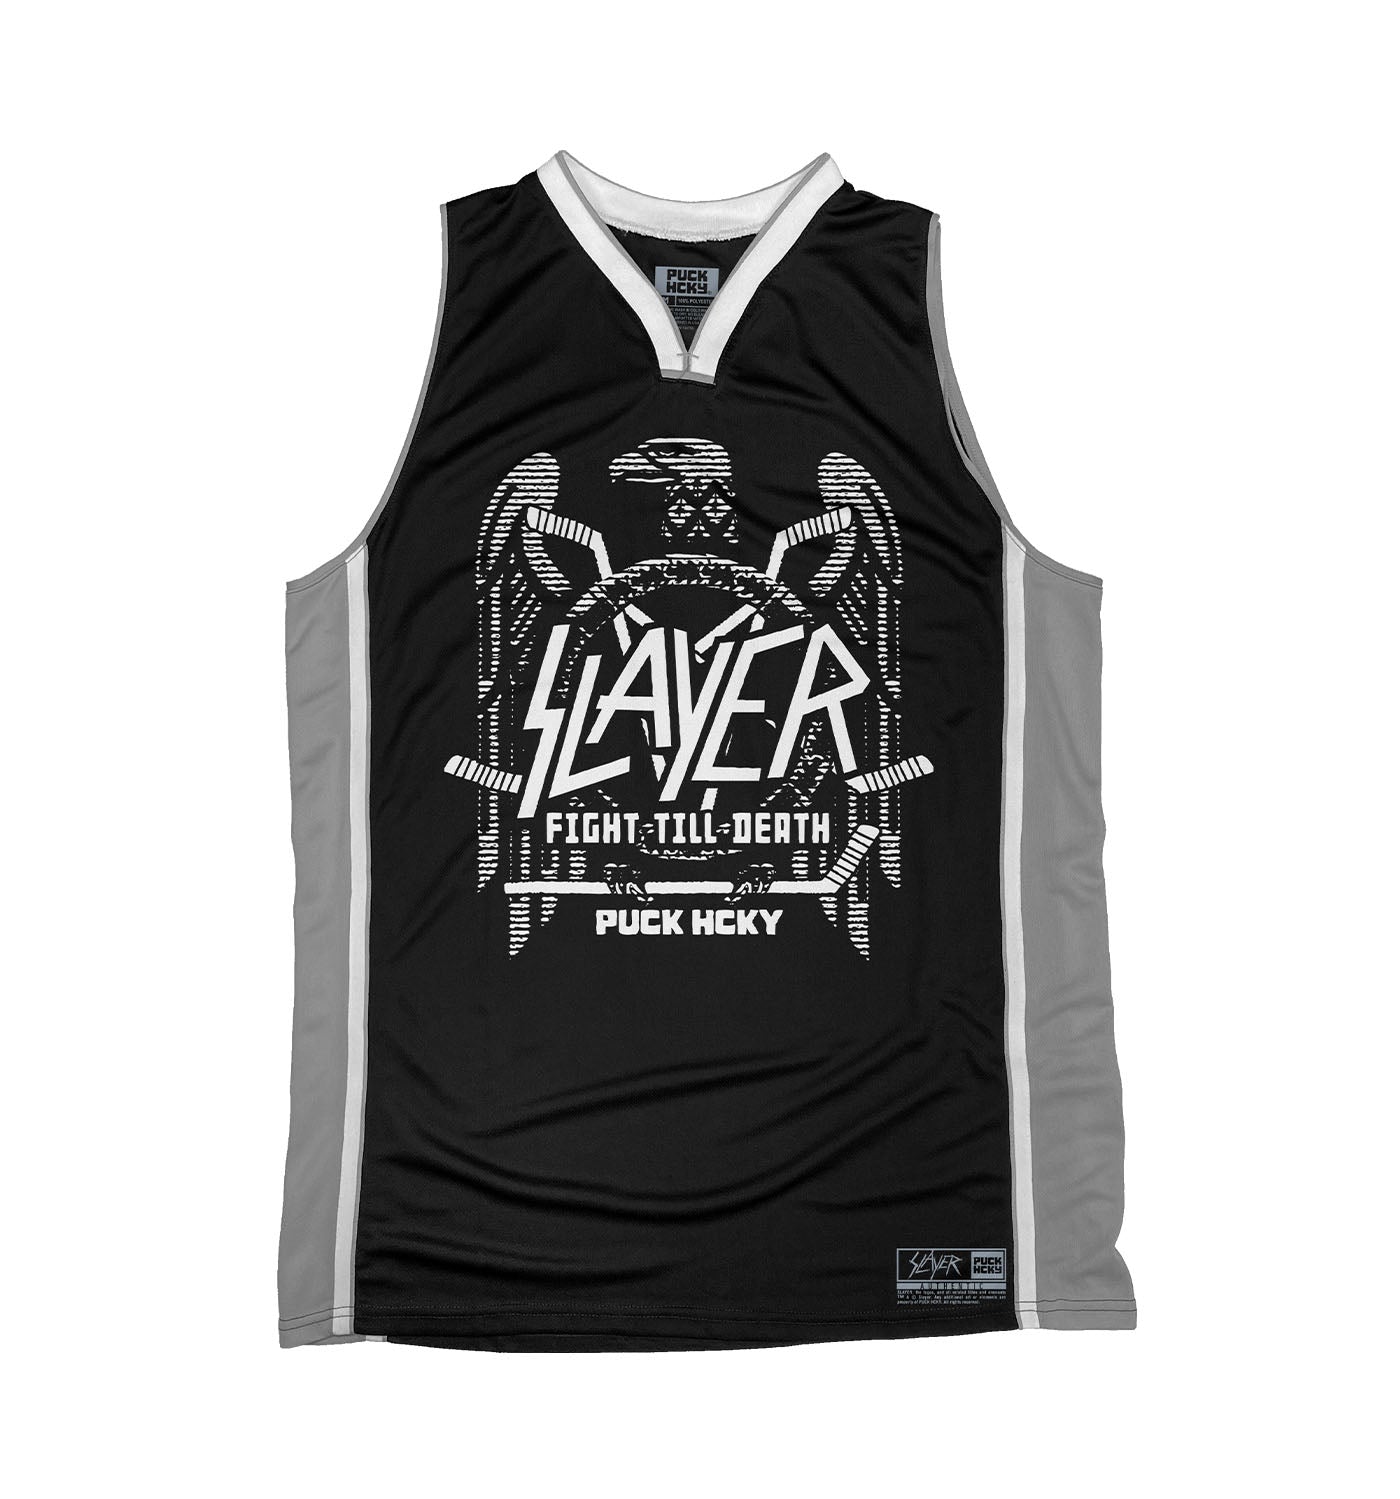 SLAYER 'FIGHT TO THE DEATH' sleeveless basketball jersey in black, grey, and white front view